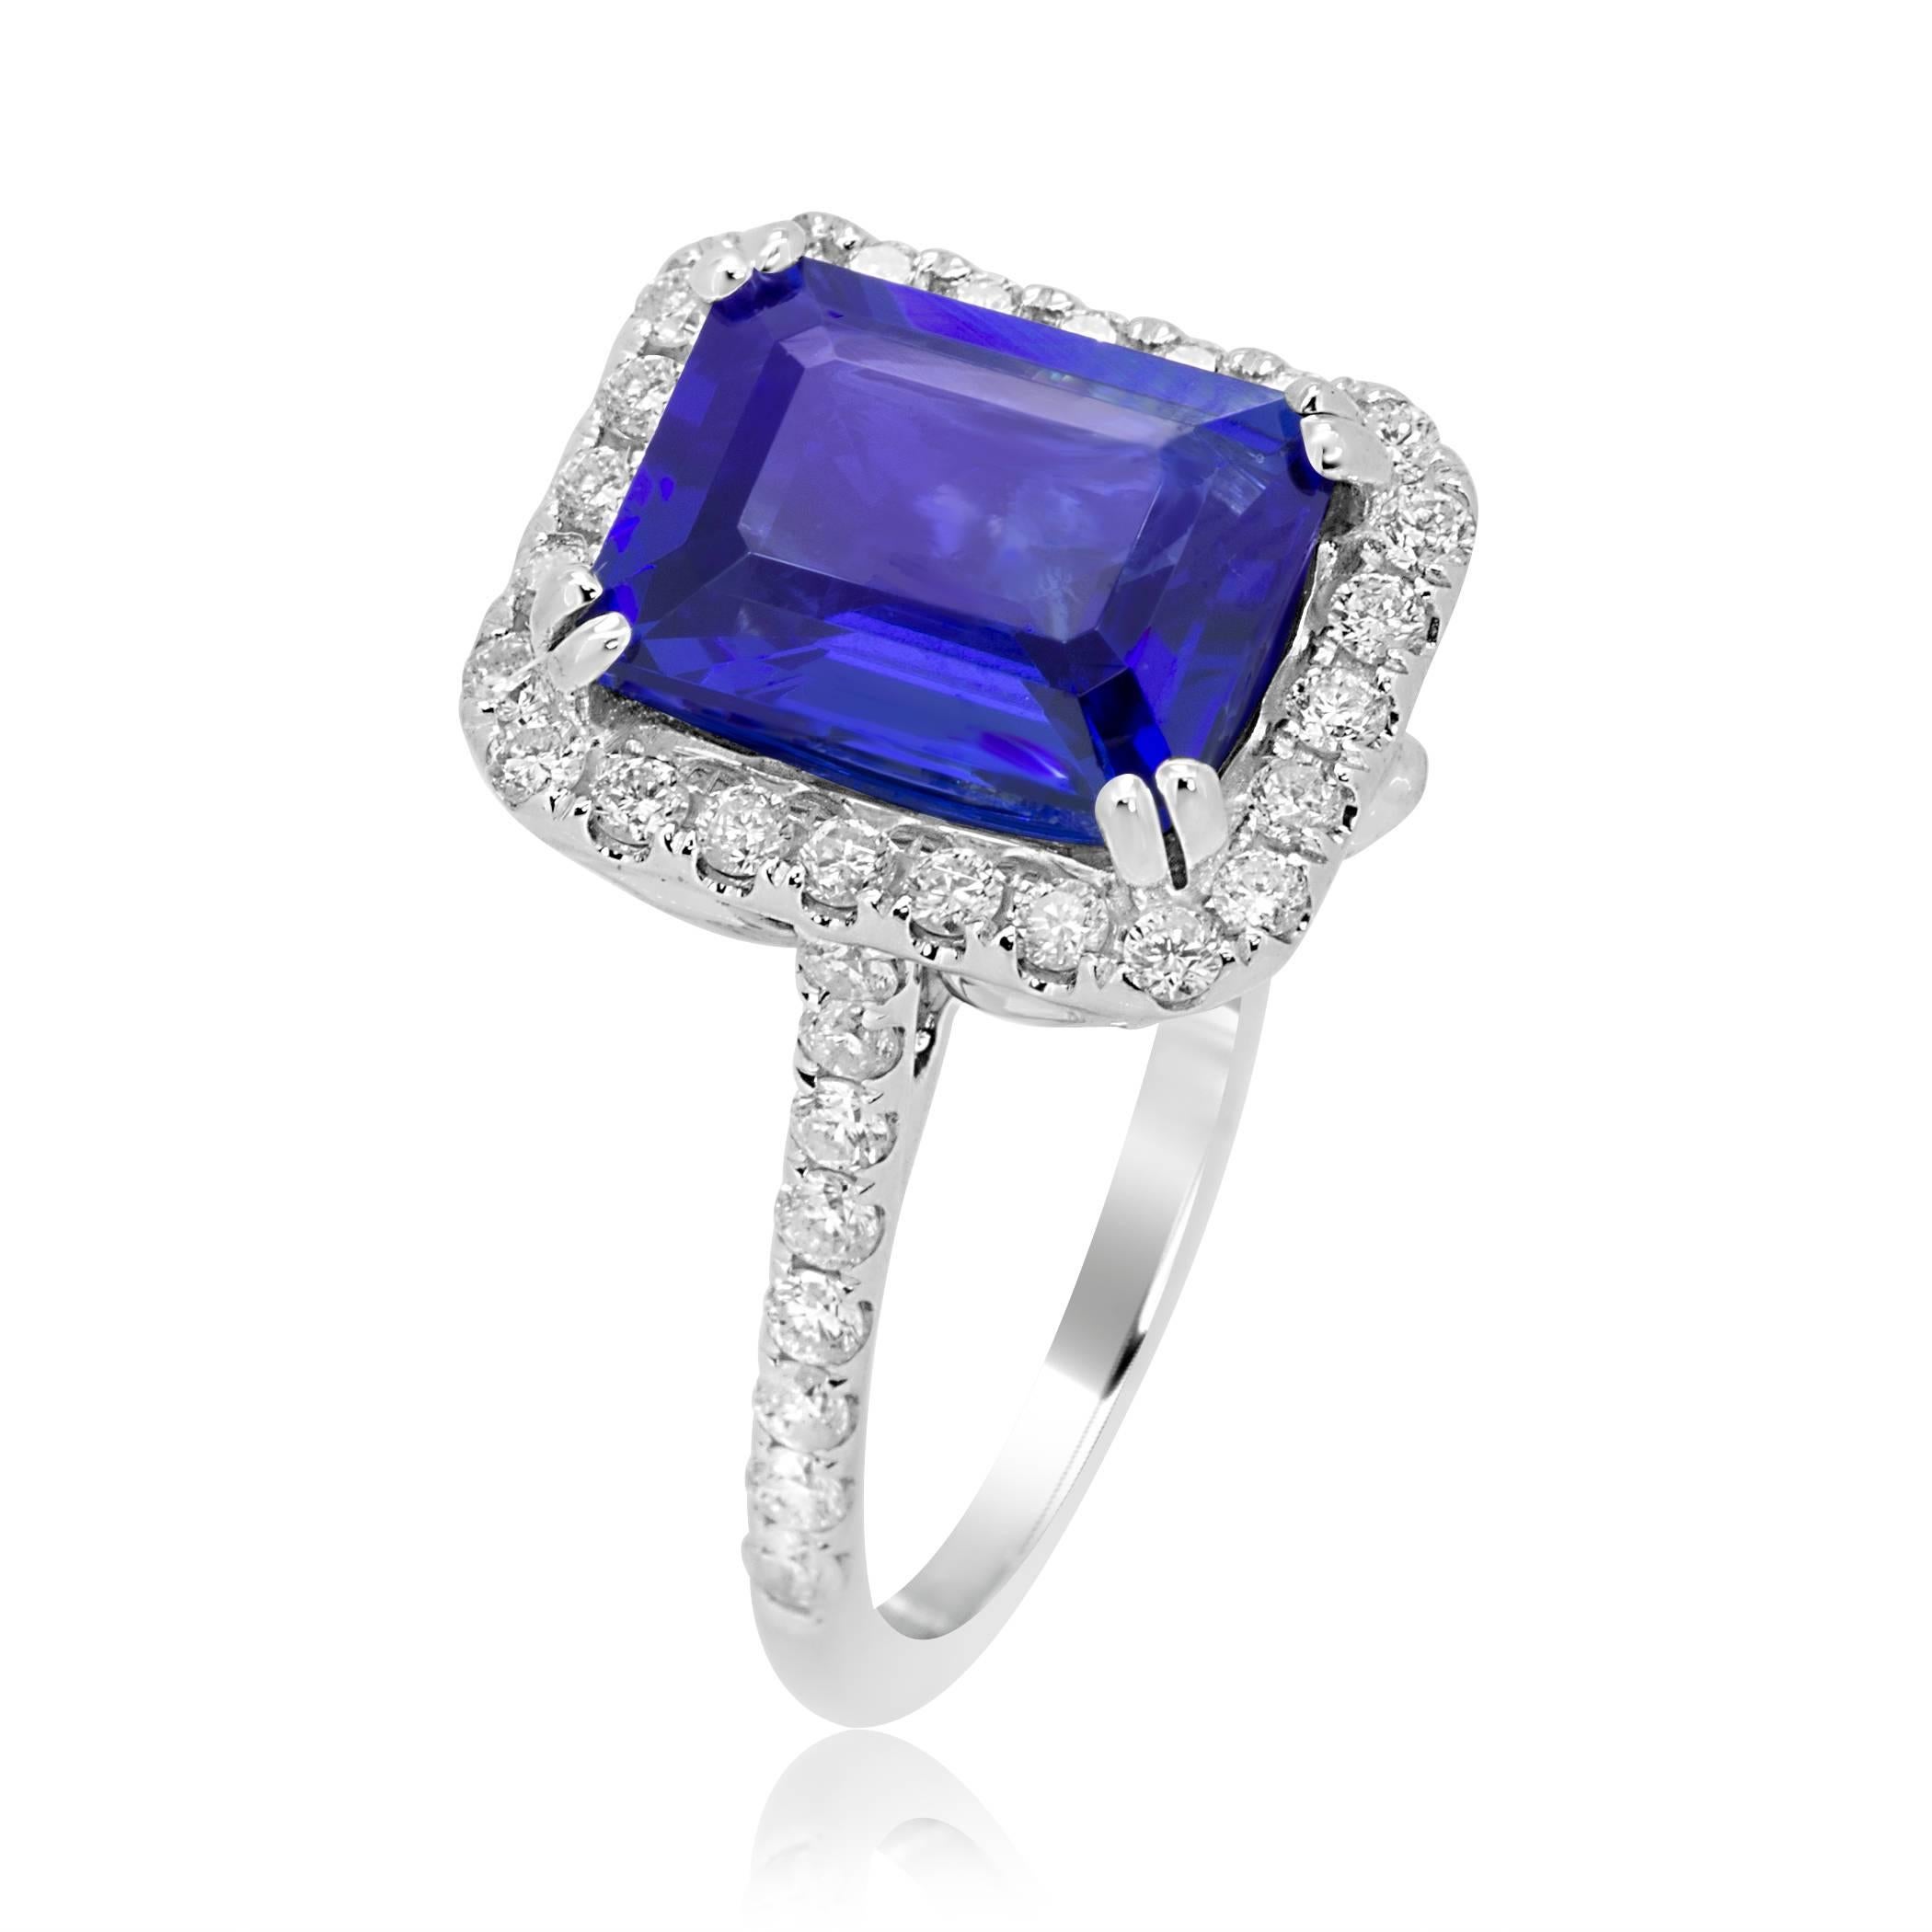 3.56 Carat Emerald Cut Tanzanite in a Halo of White Diamond 44 stones 0.66 Carat in 18K White Gold Ring. With a single row Diamond Shank.